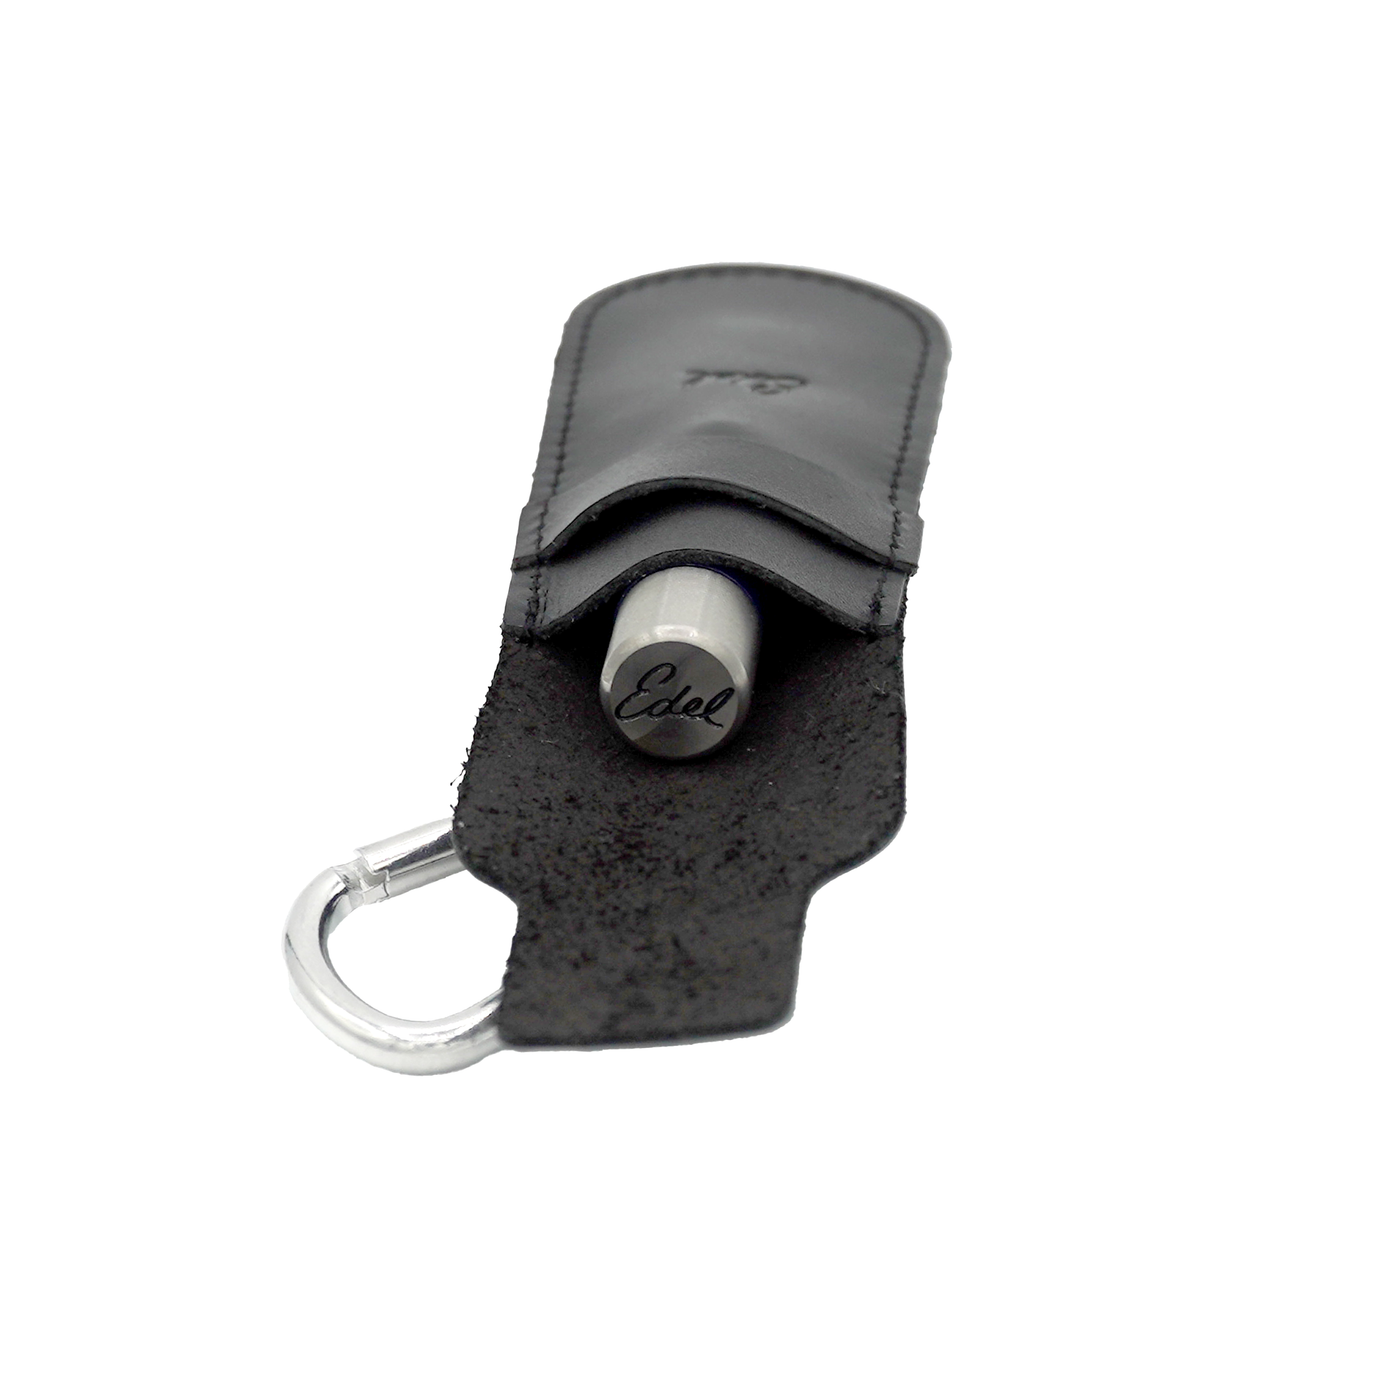 Edel Repair Tool featuring a black and red ferrule in a leather sleeve